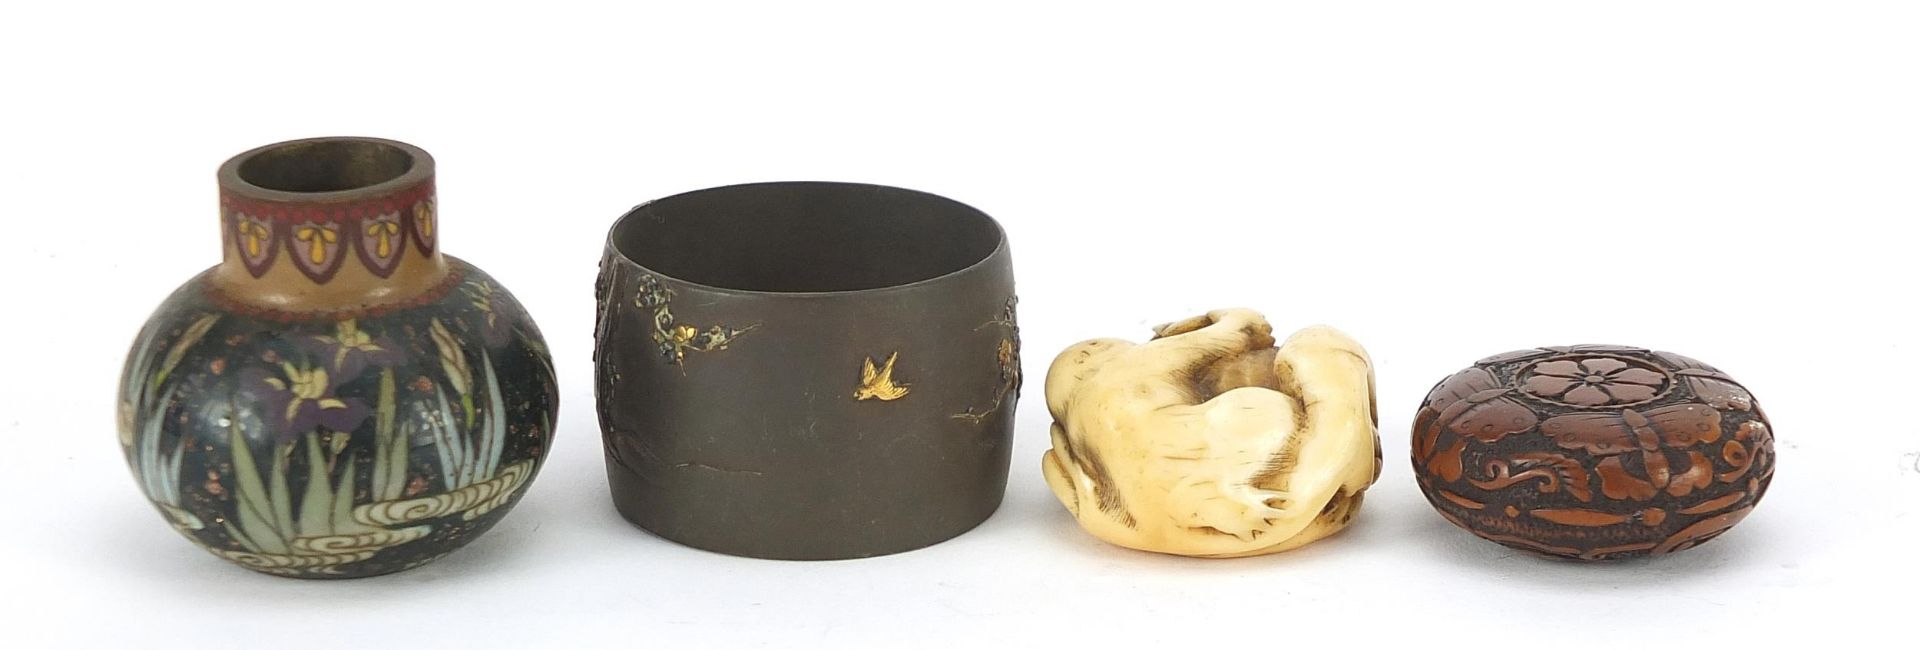 Japanese objects including an ivory toggle, mixed metal napkin ring and cloisonne vase, the - Image 2 of 6